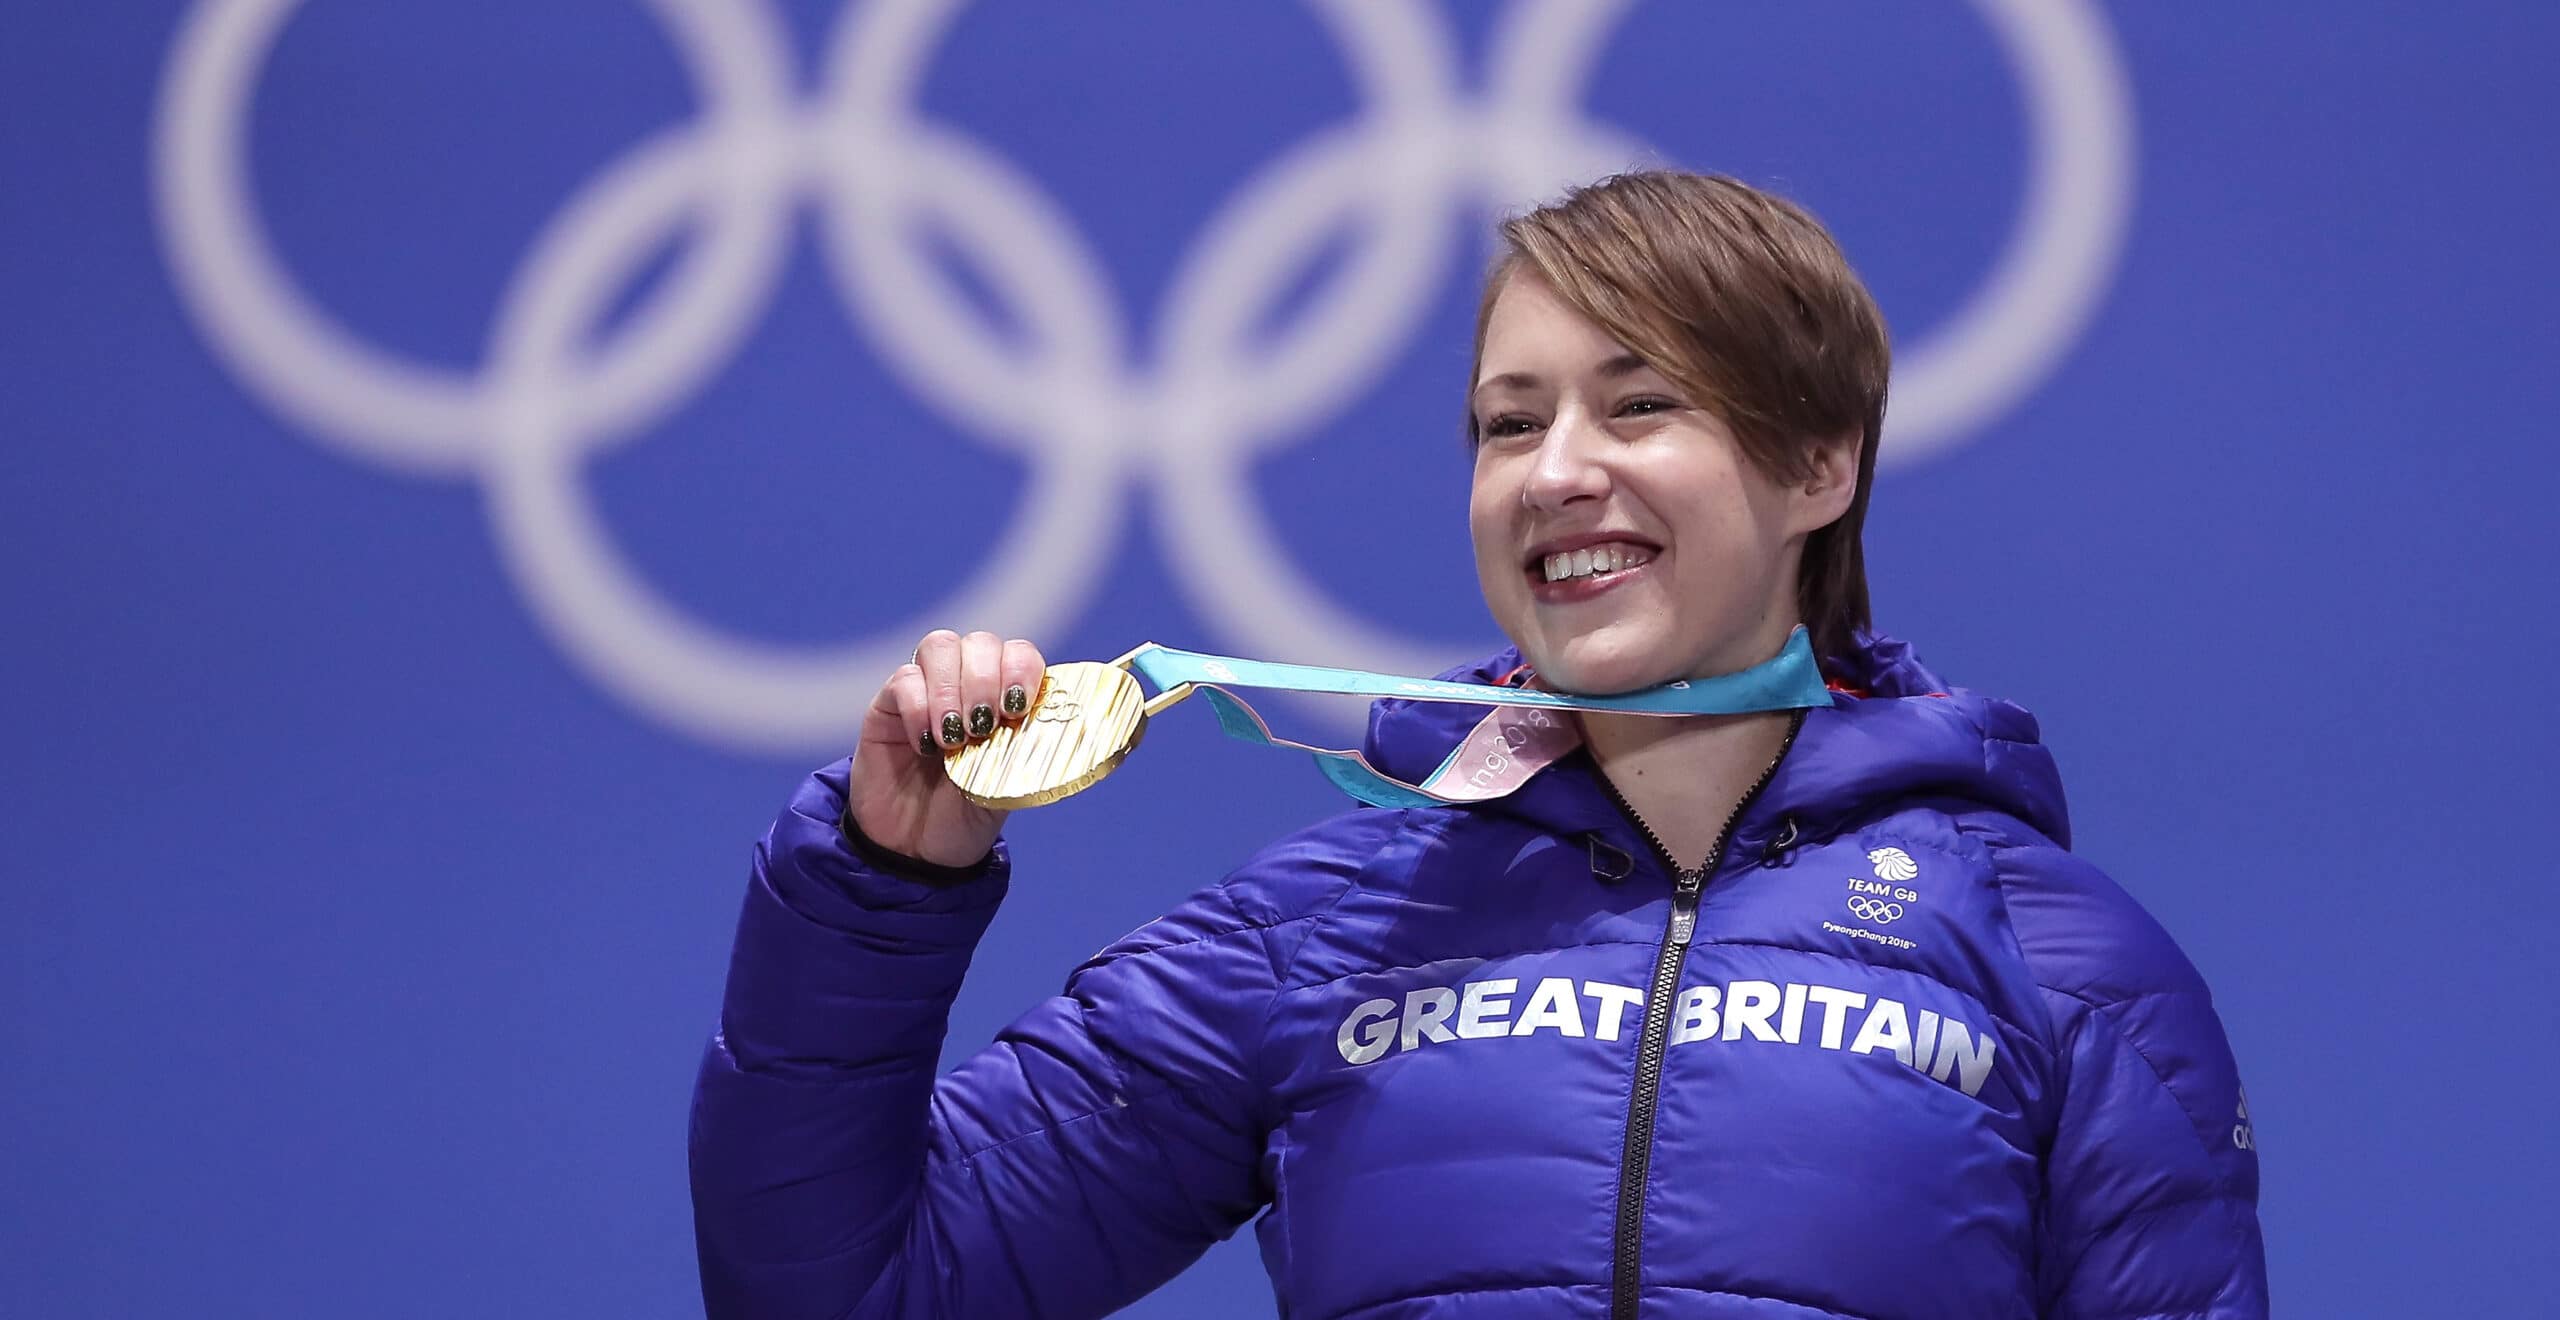 Lizzy yarnold scaled